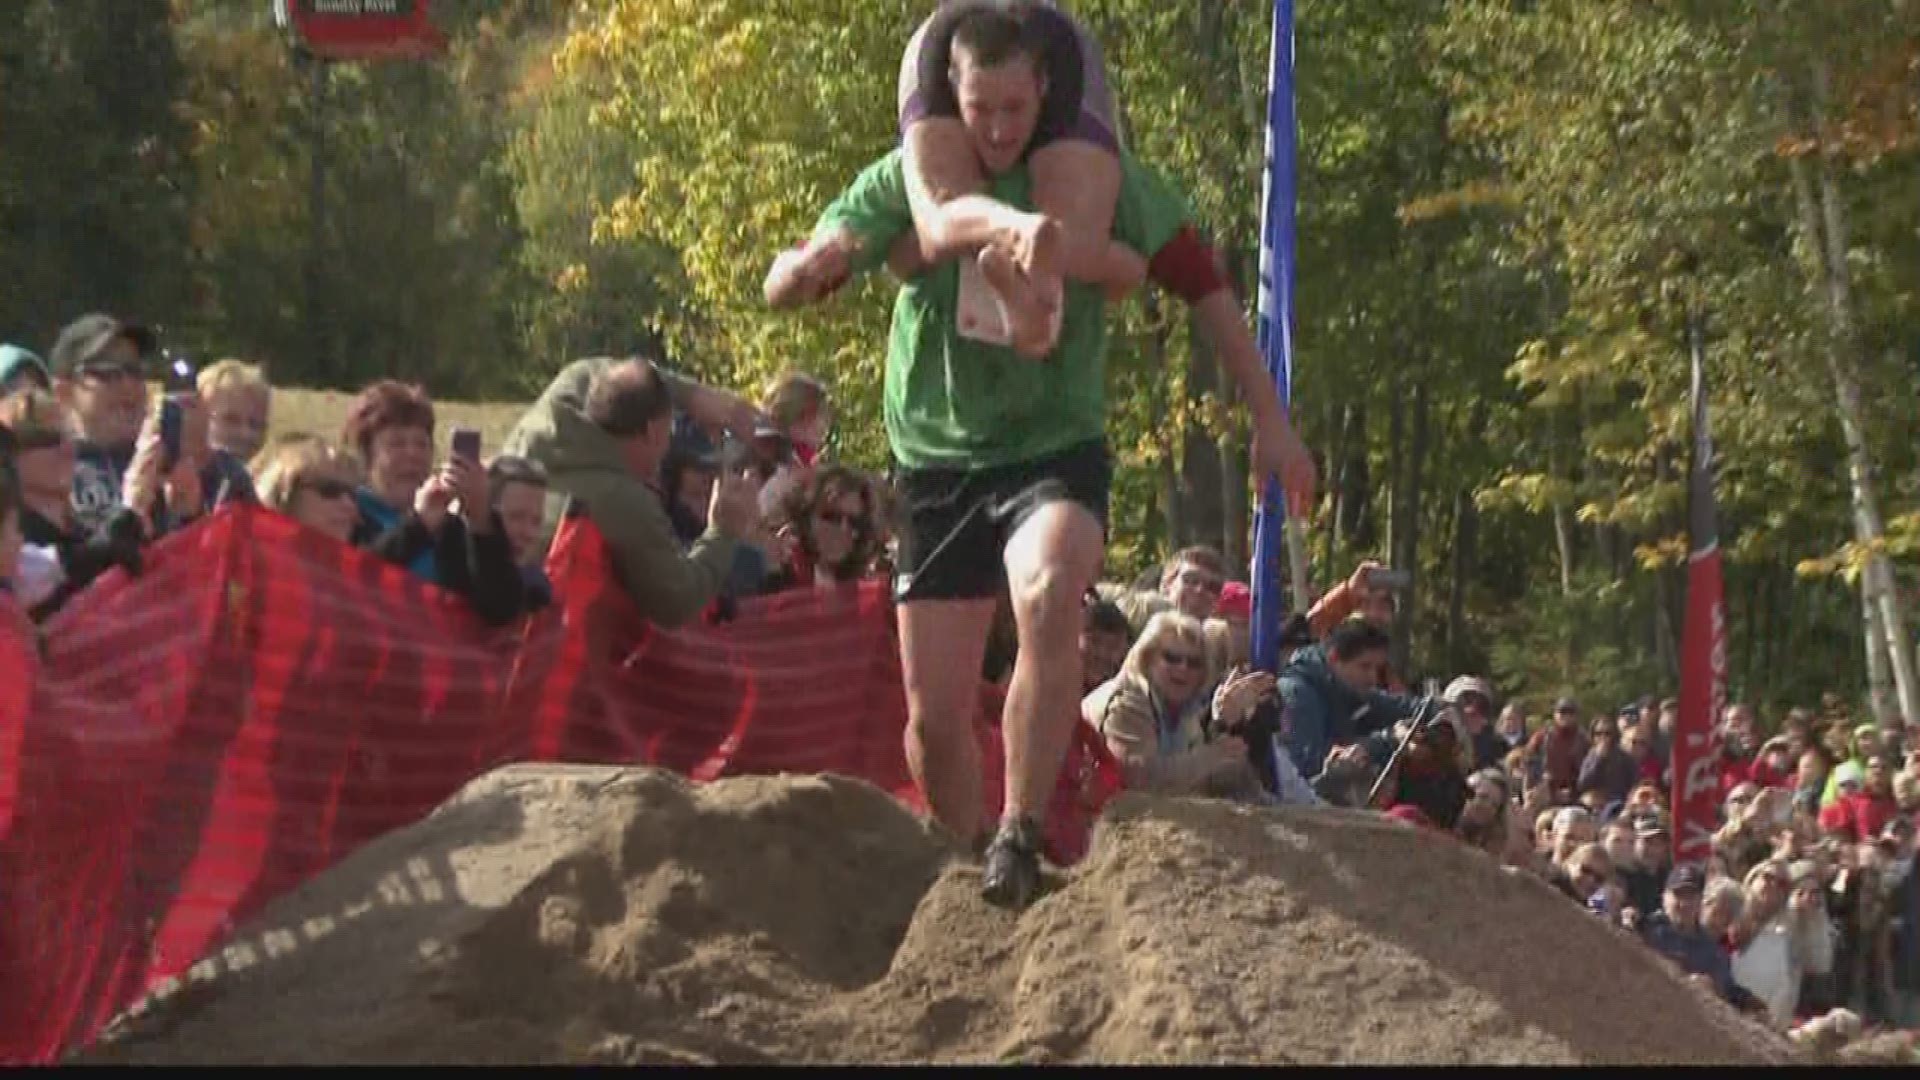 Wife Carrying Championship